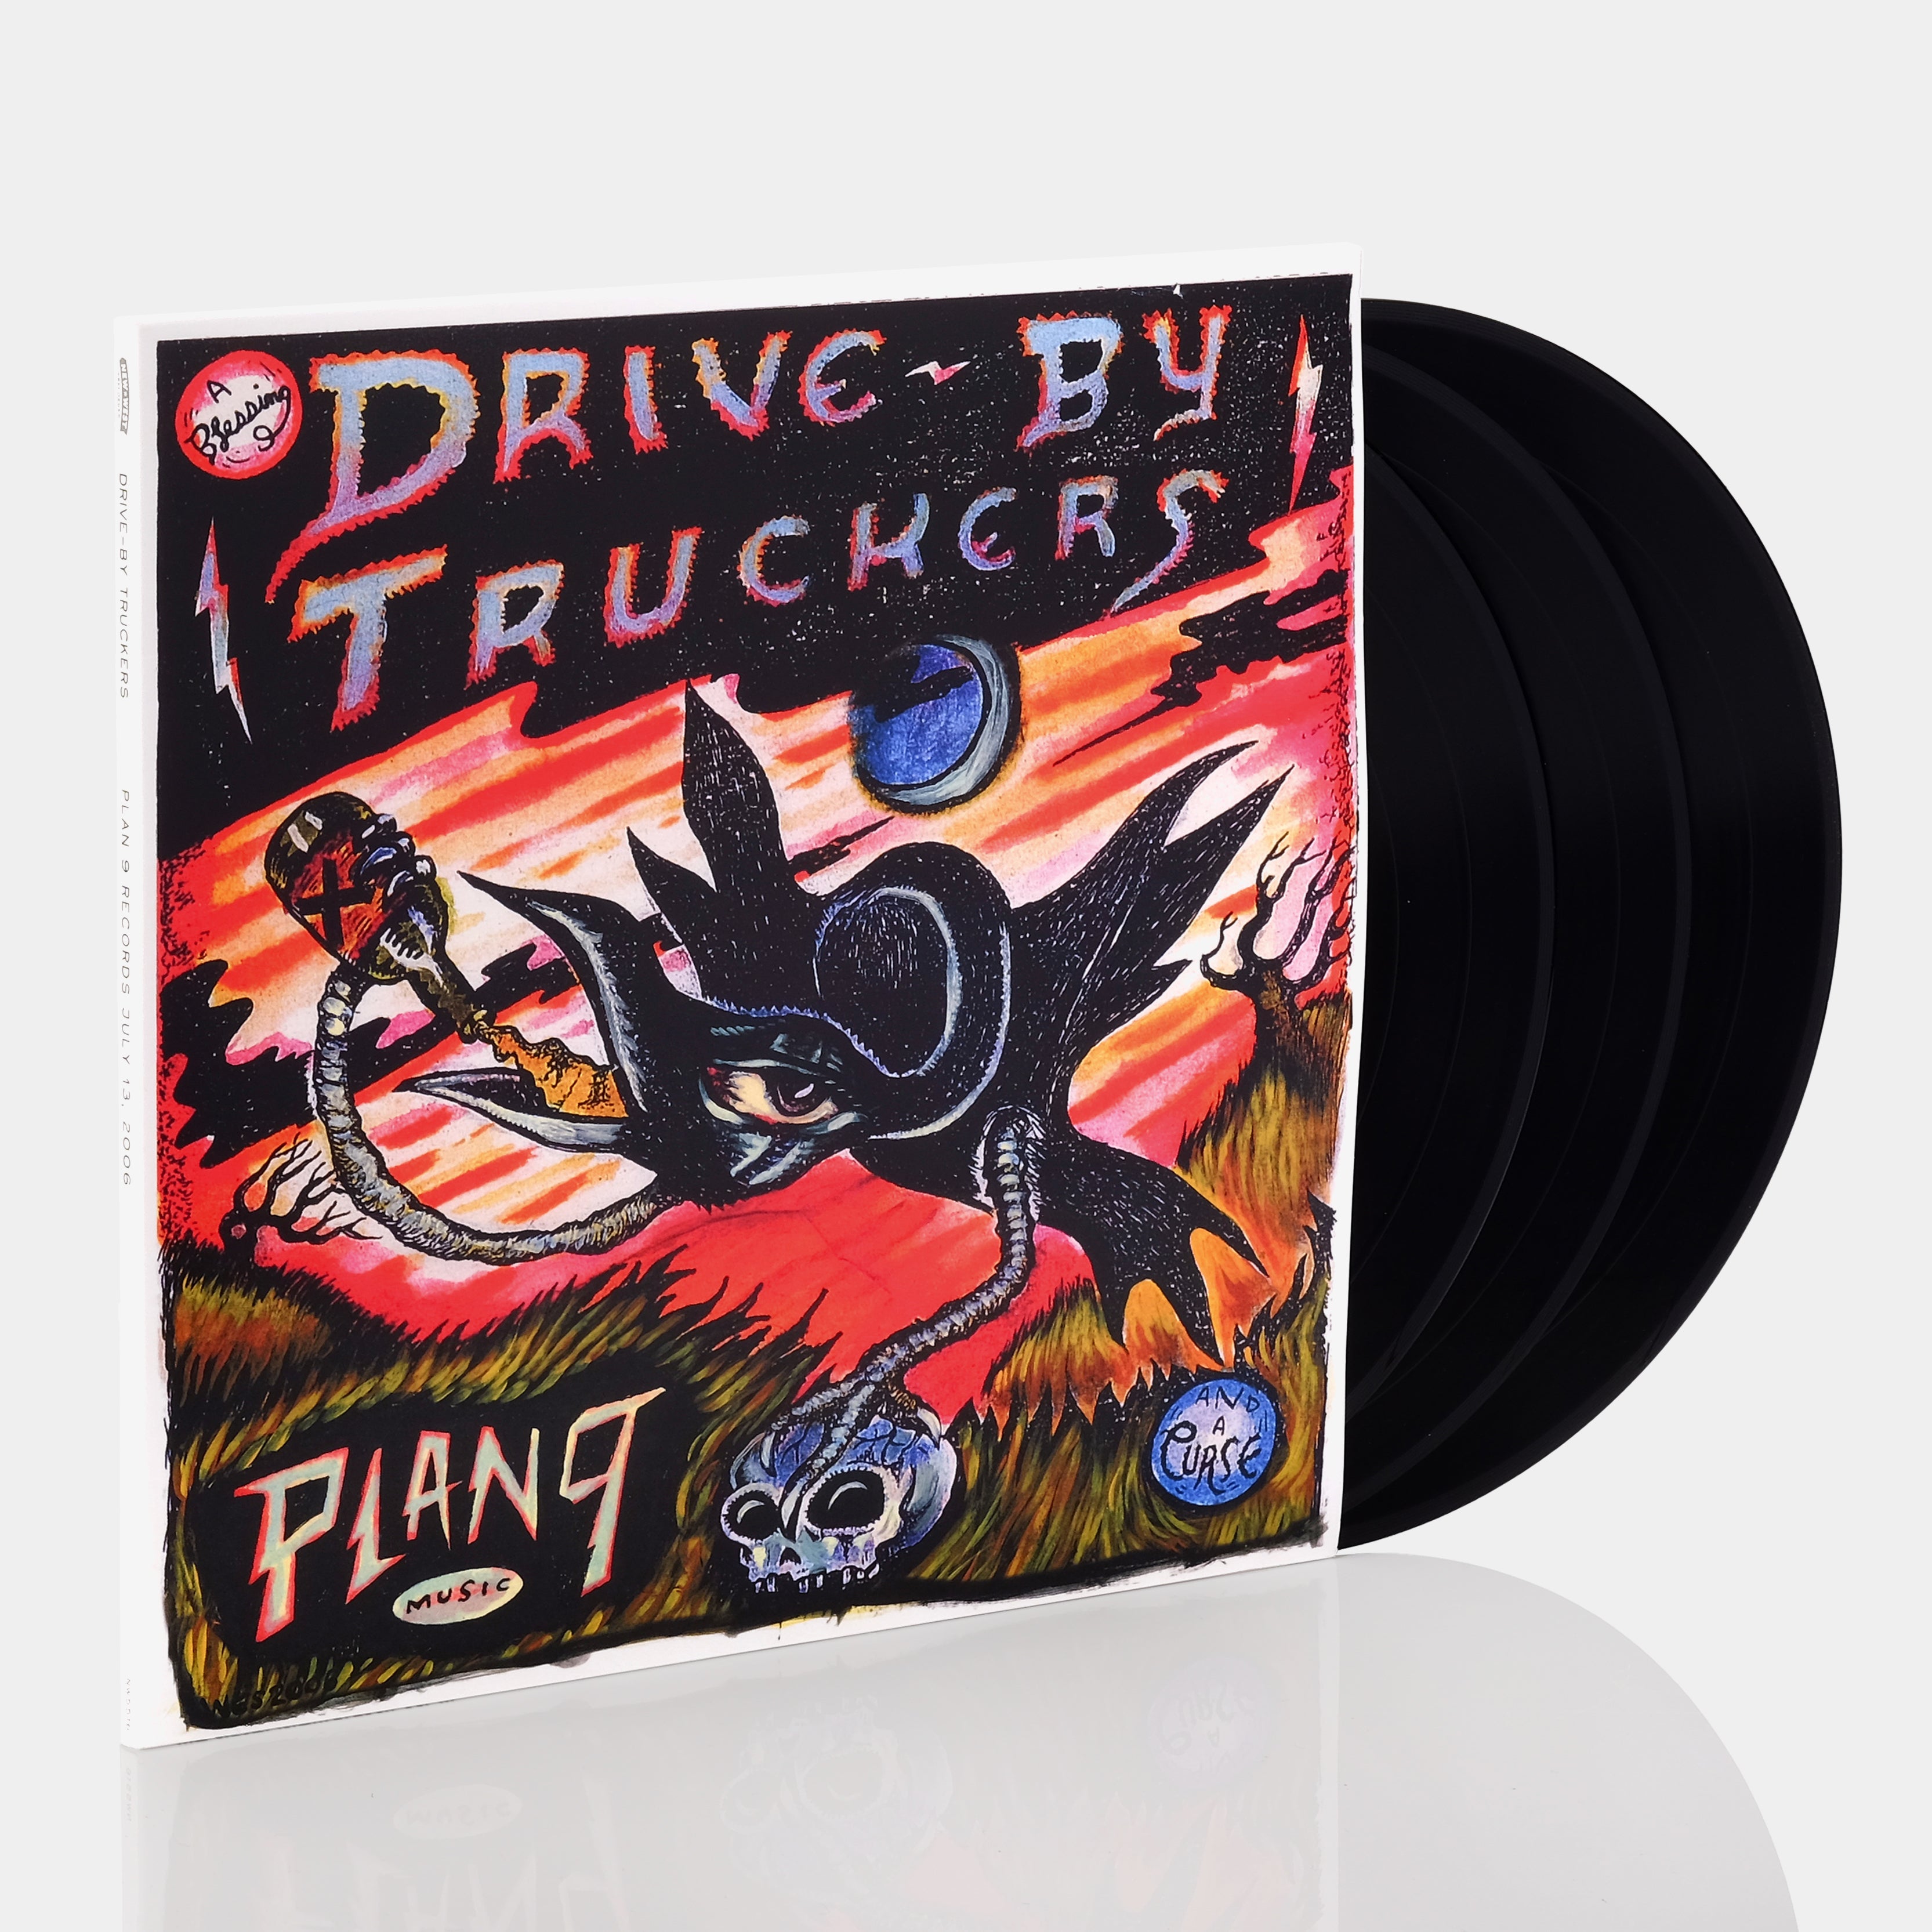 Drive-By Truckers - Plan 9 Records July 13, 2006 3xLP Vinyl Record